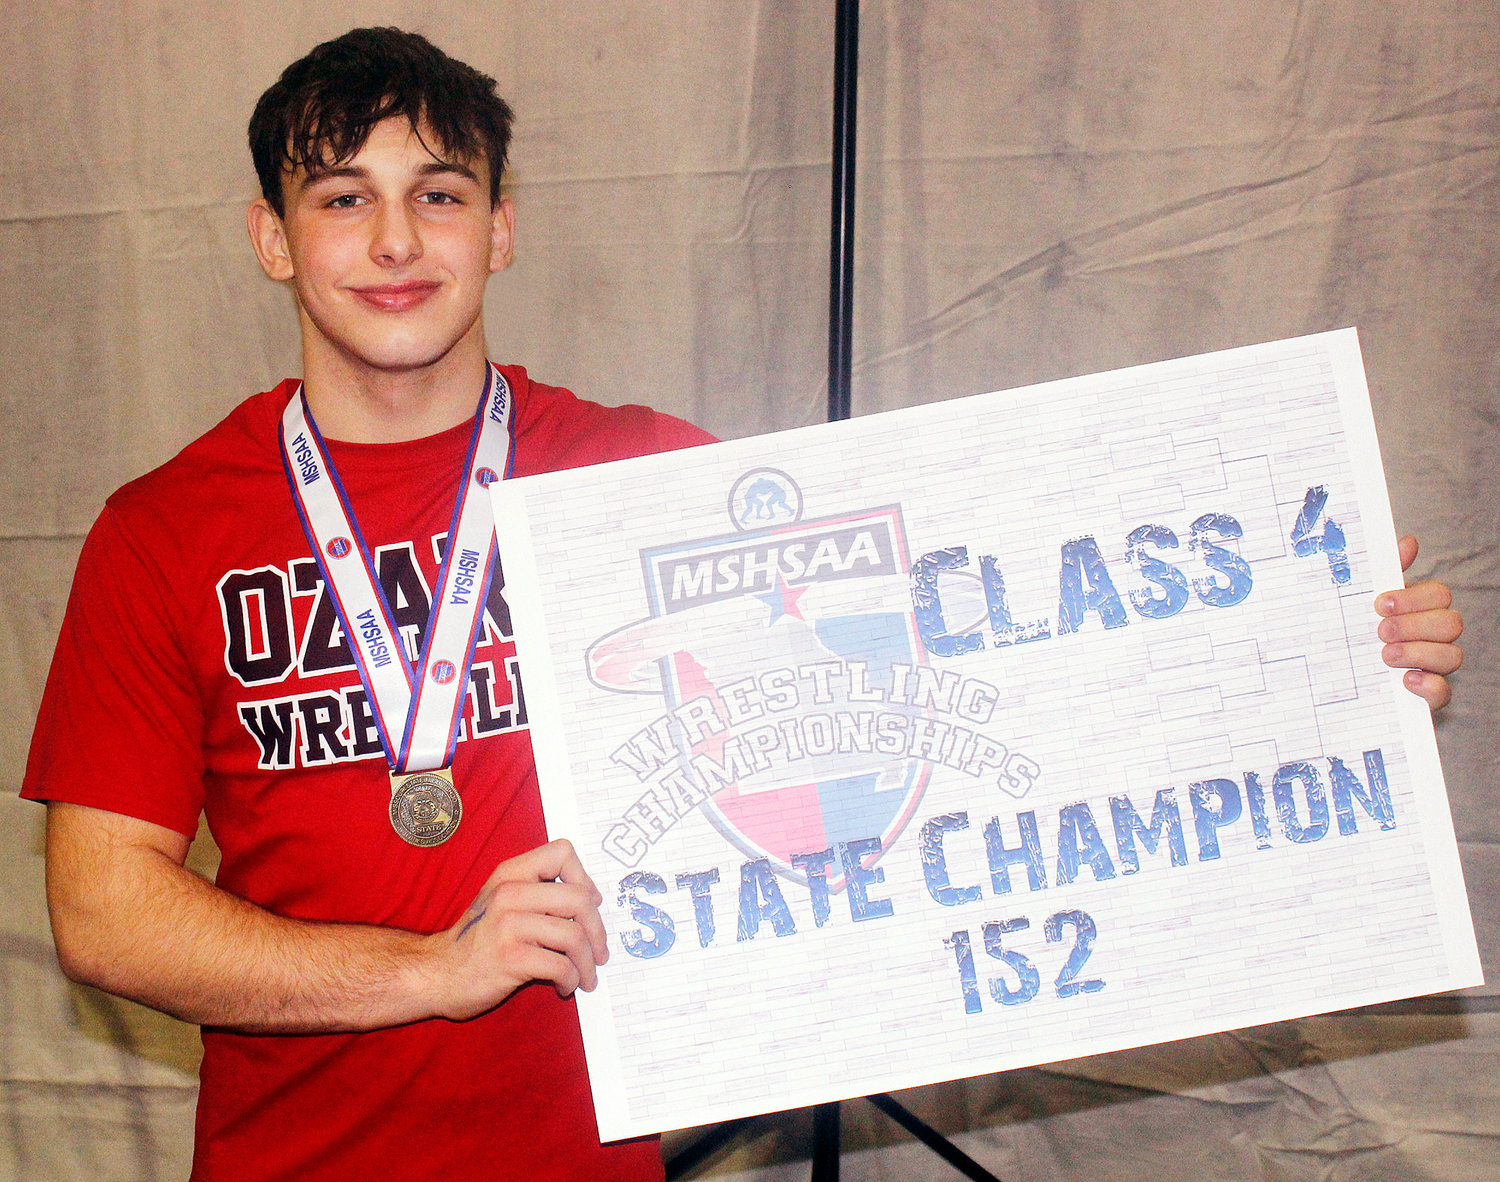 BRAXTON STRICK shows of his medal and state championship placard.